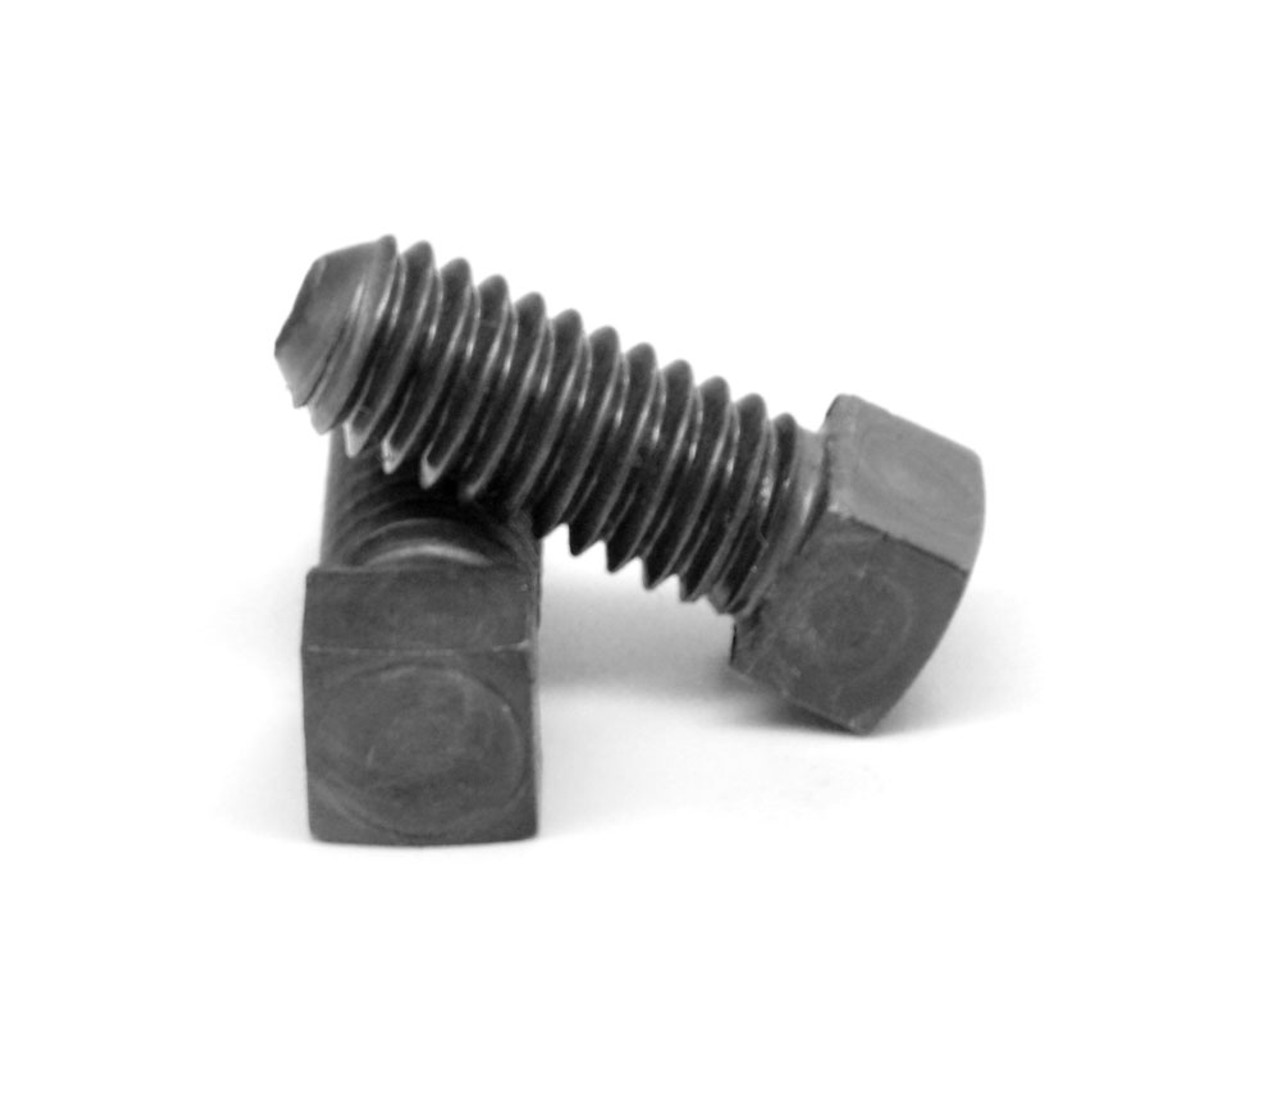 3/8"-16 x 2 1/2" (FT) Coarse Thread Square Head Set Screw Oval Point Low Carbon Steel Case Hardened Plain Finish